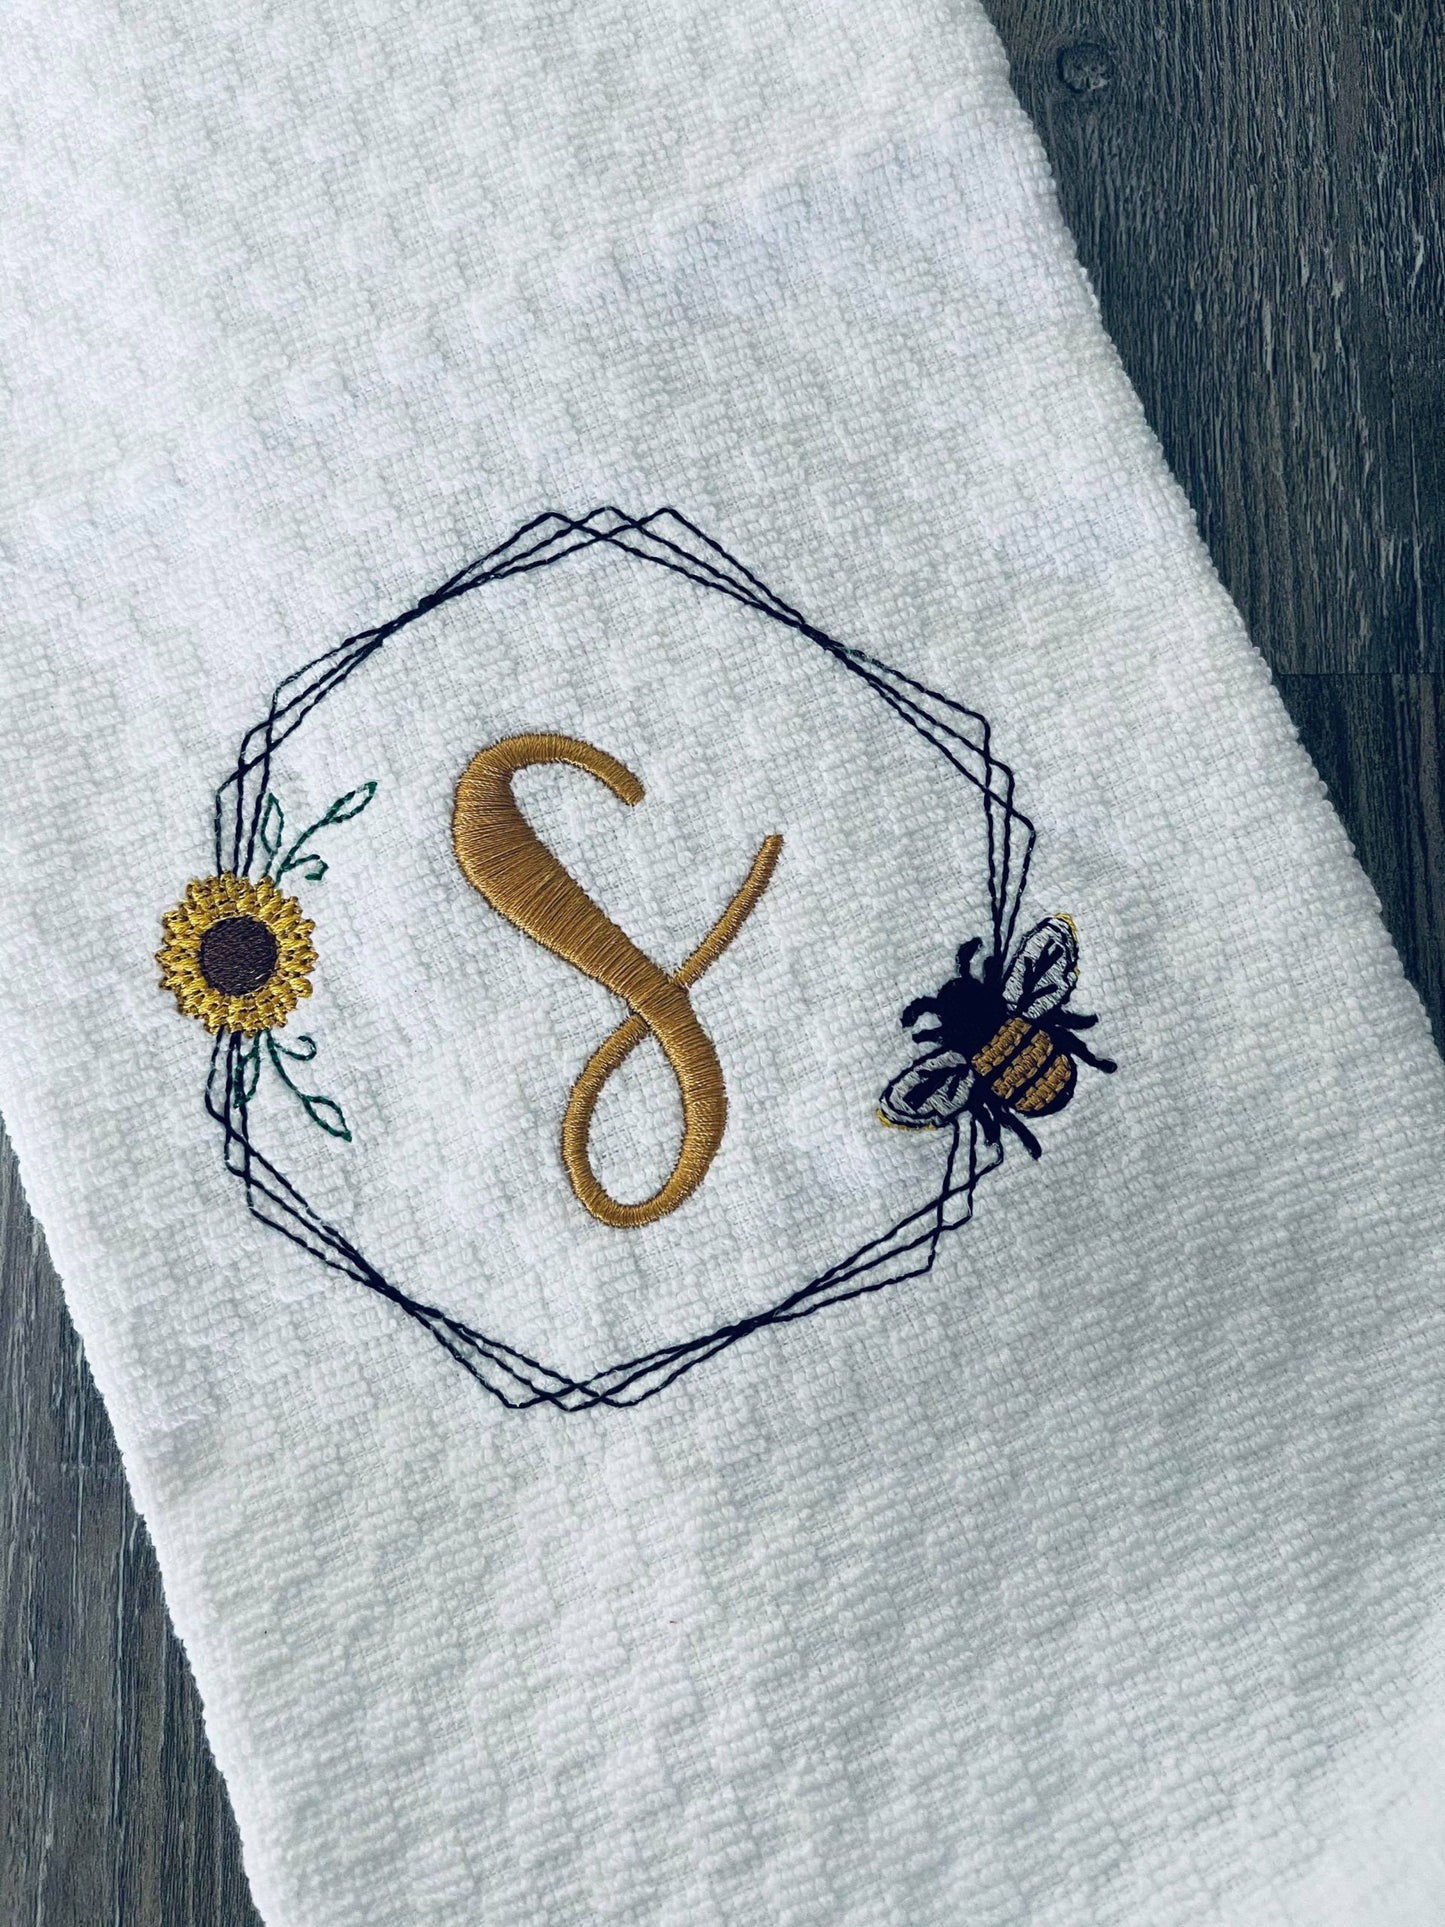 Bee Frame #2 - 4 sizes- Digital Embroidery Design